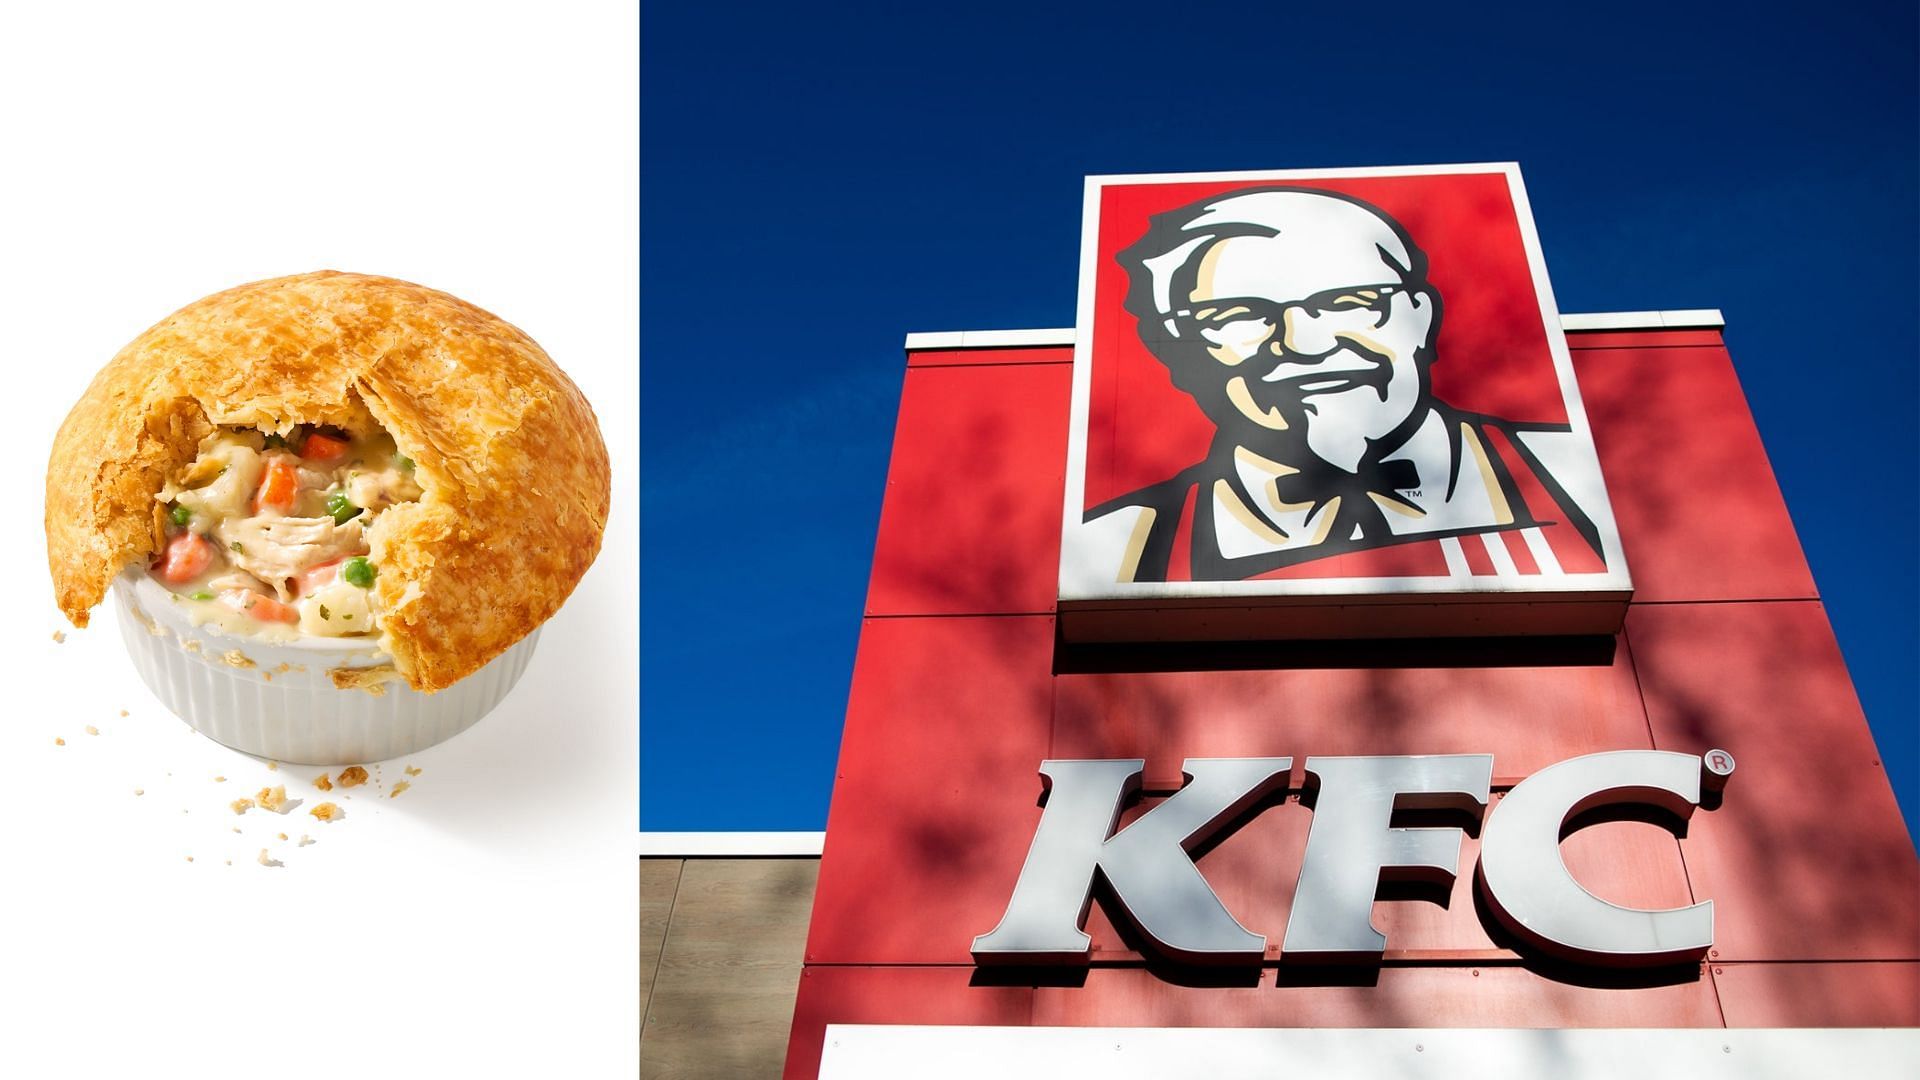 KFC debuts a limited-time deal with Pot Pies for $5 (Picture Alliance/Getty Images)